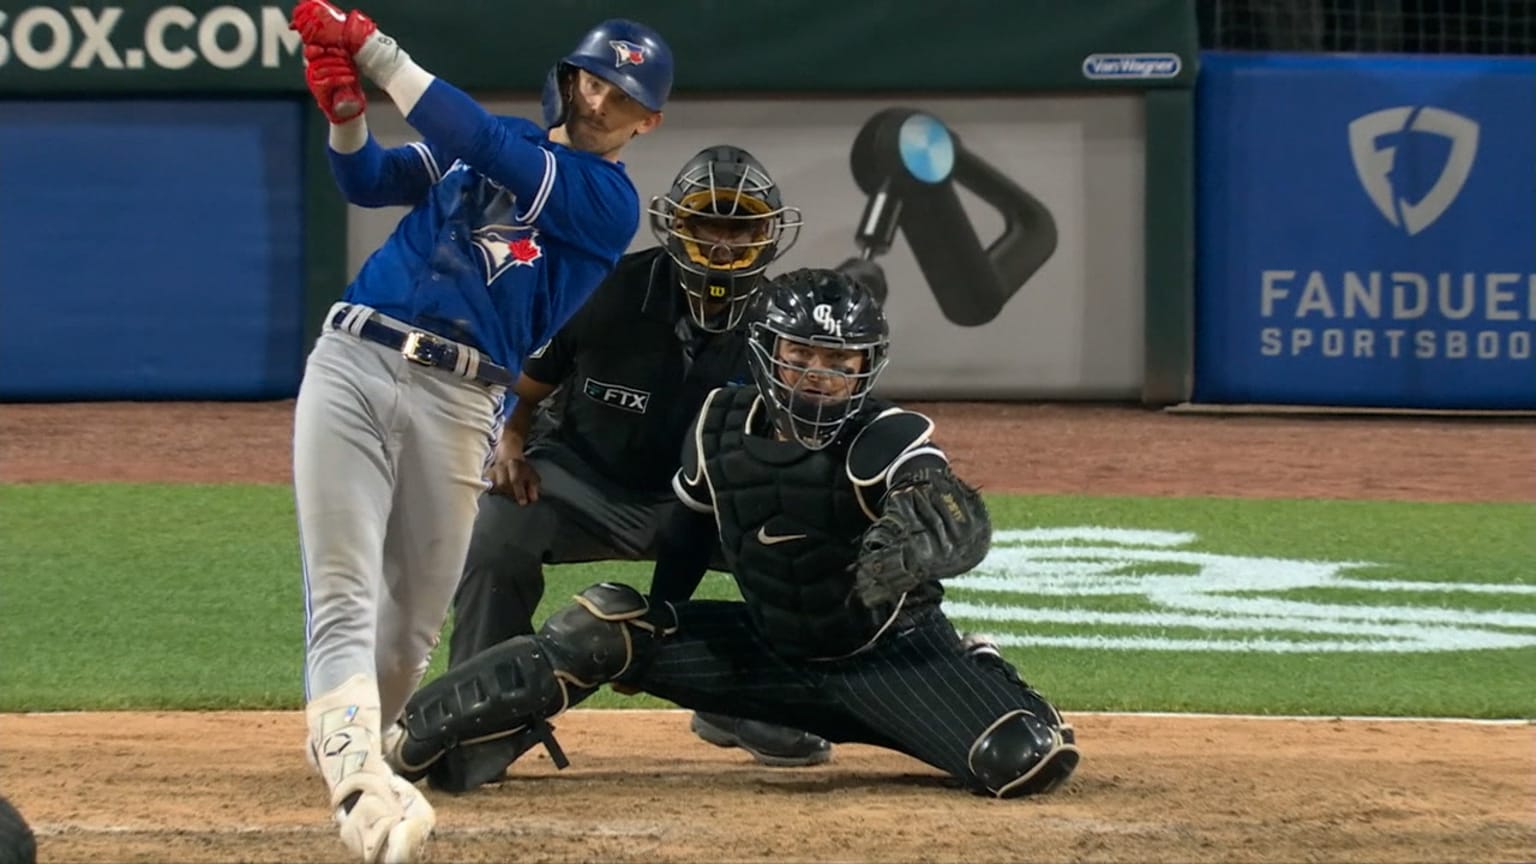 Rookie Cavan Biggio busts out with bat to help Jays avoid sweep